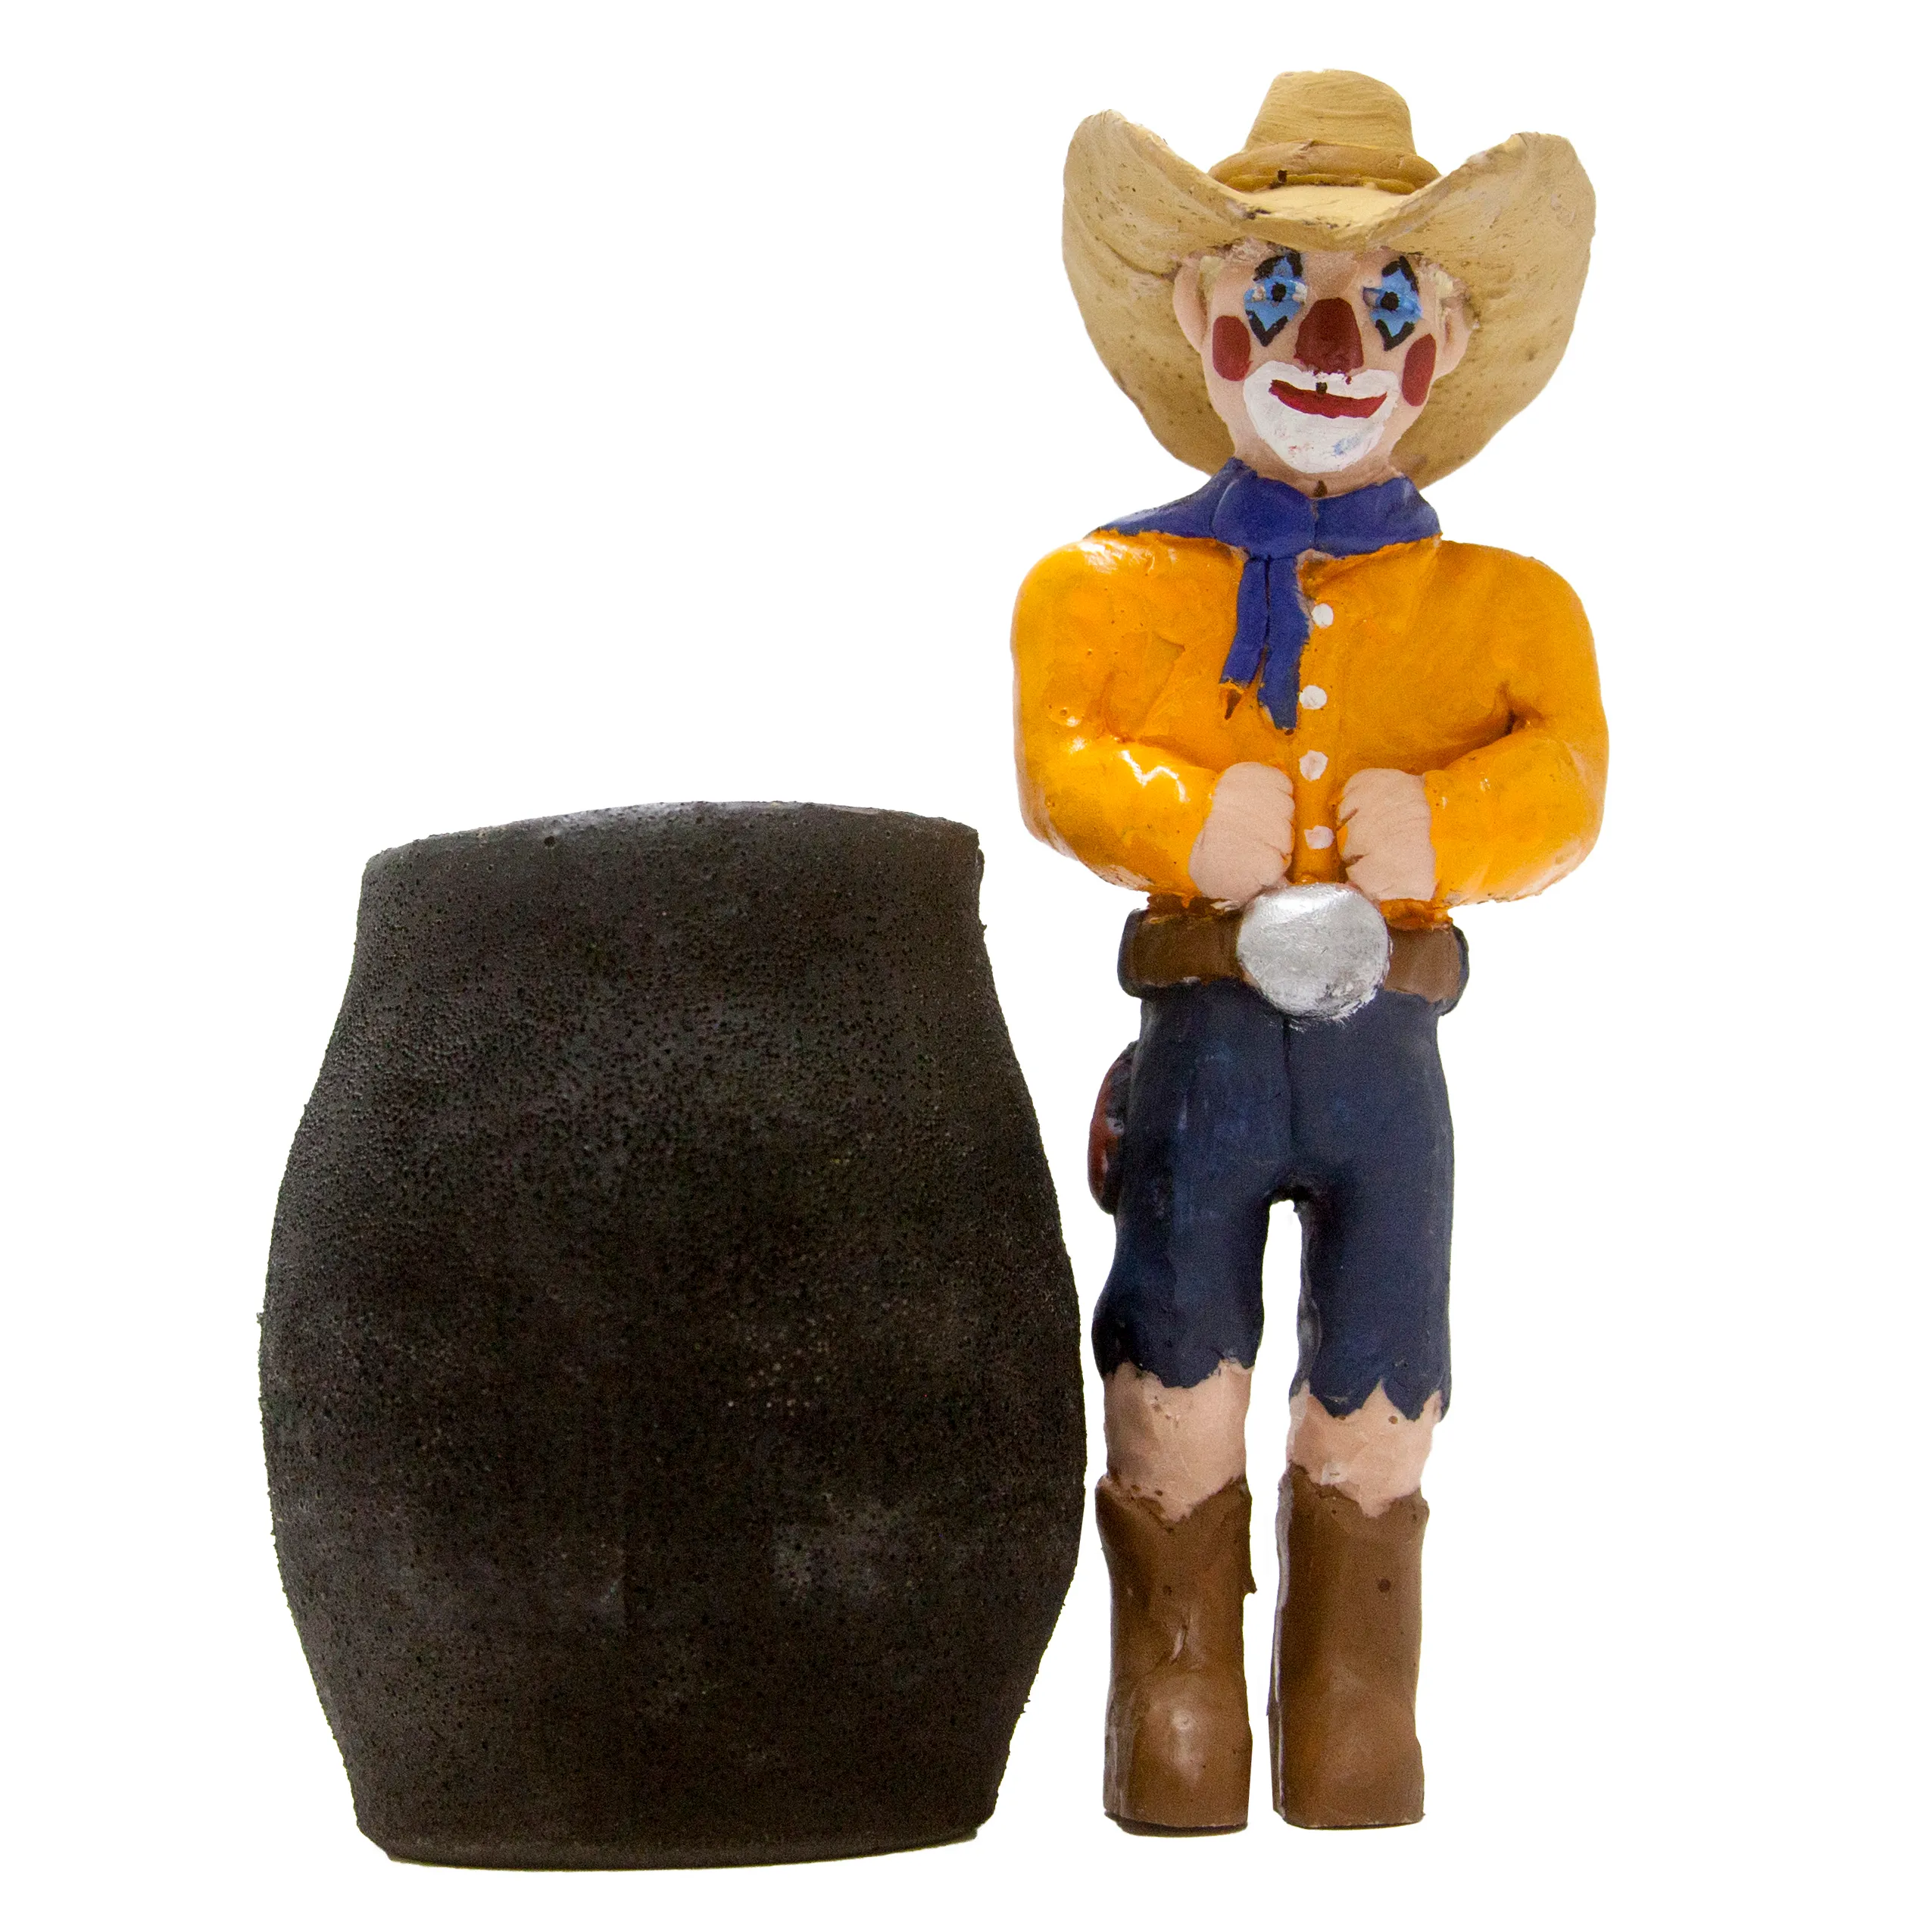 a photo of a rodeo clown doll with a black barrel